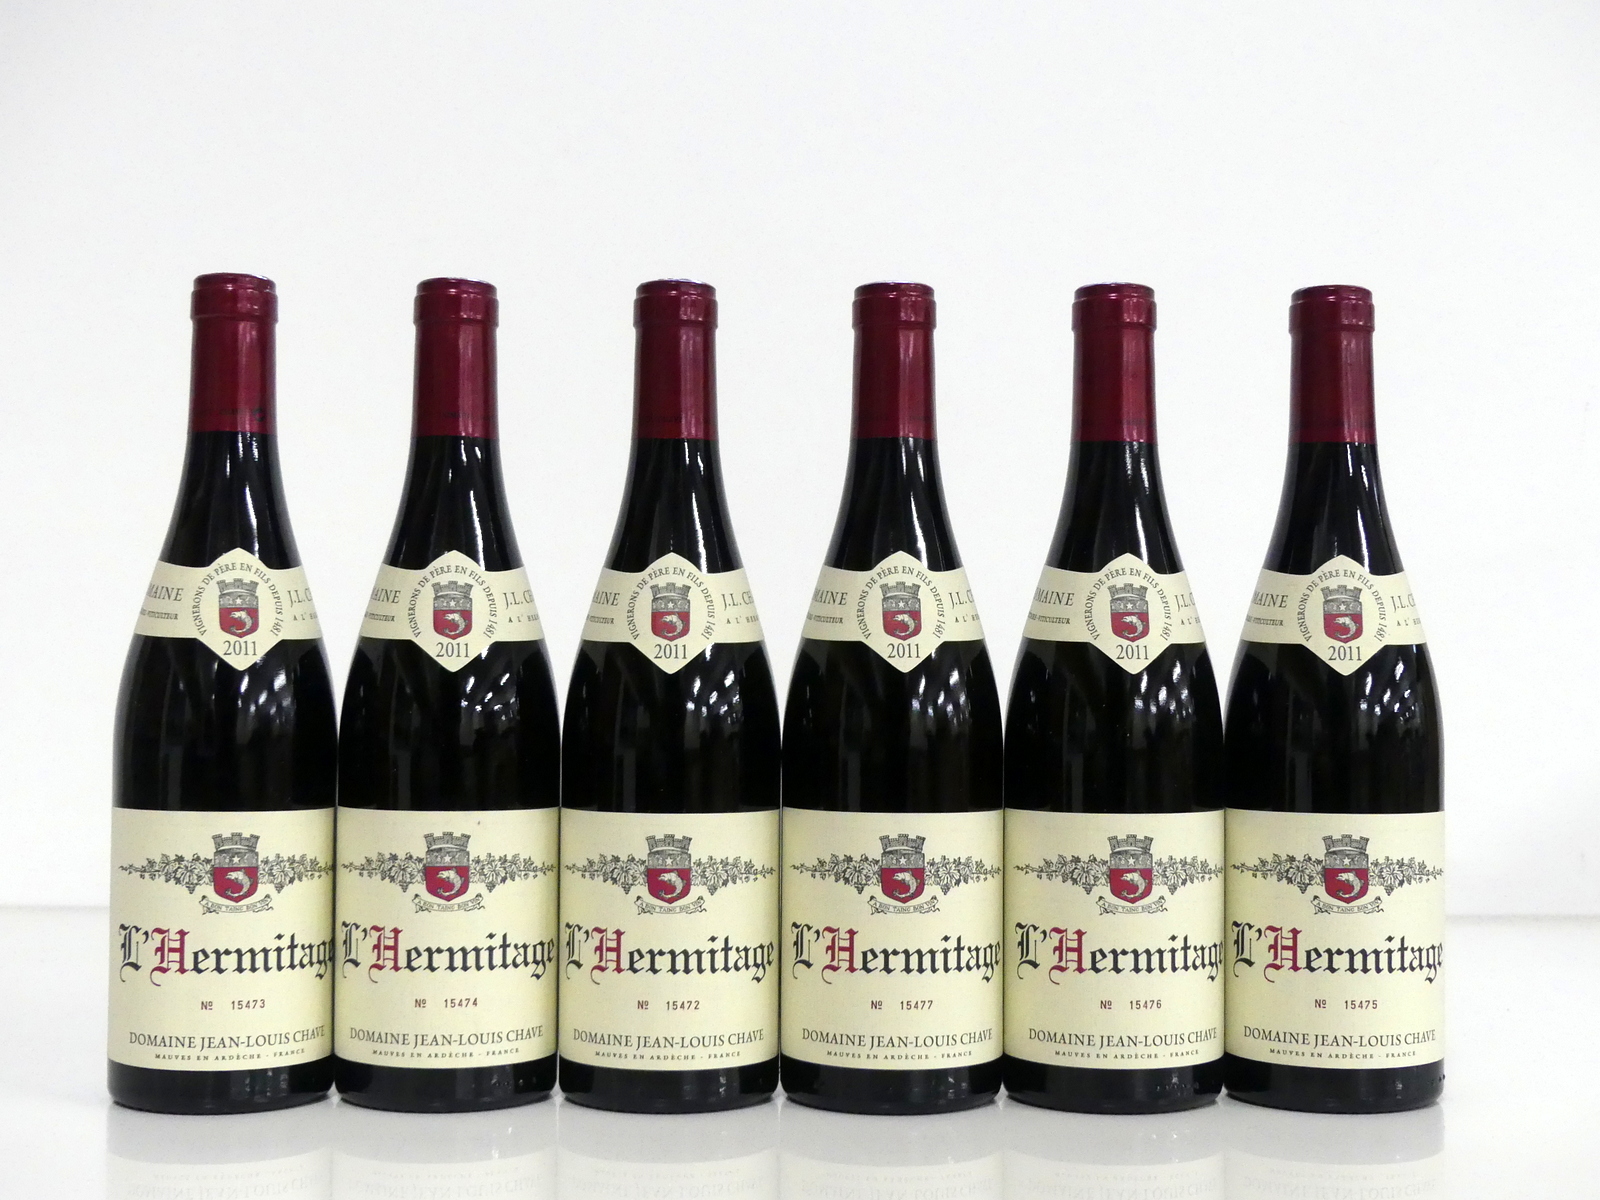 6 bts L'Hermitage 2011 oc Dom Jean-Louis Chave 5 hf, 1 hf/i.n